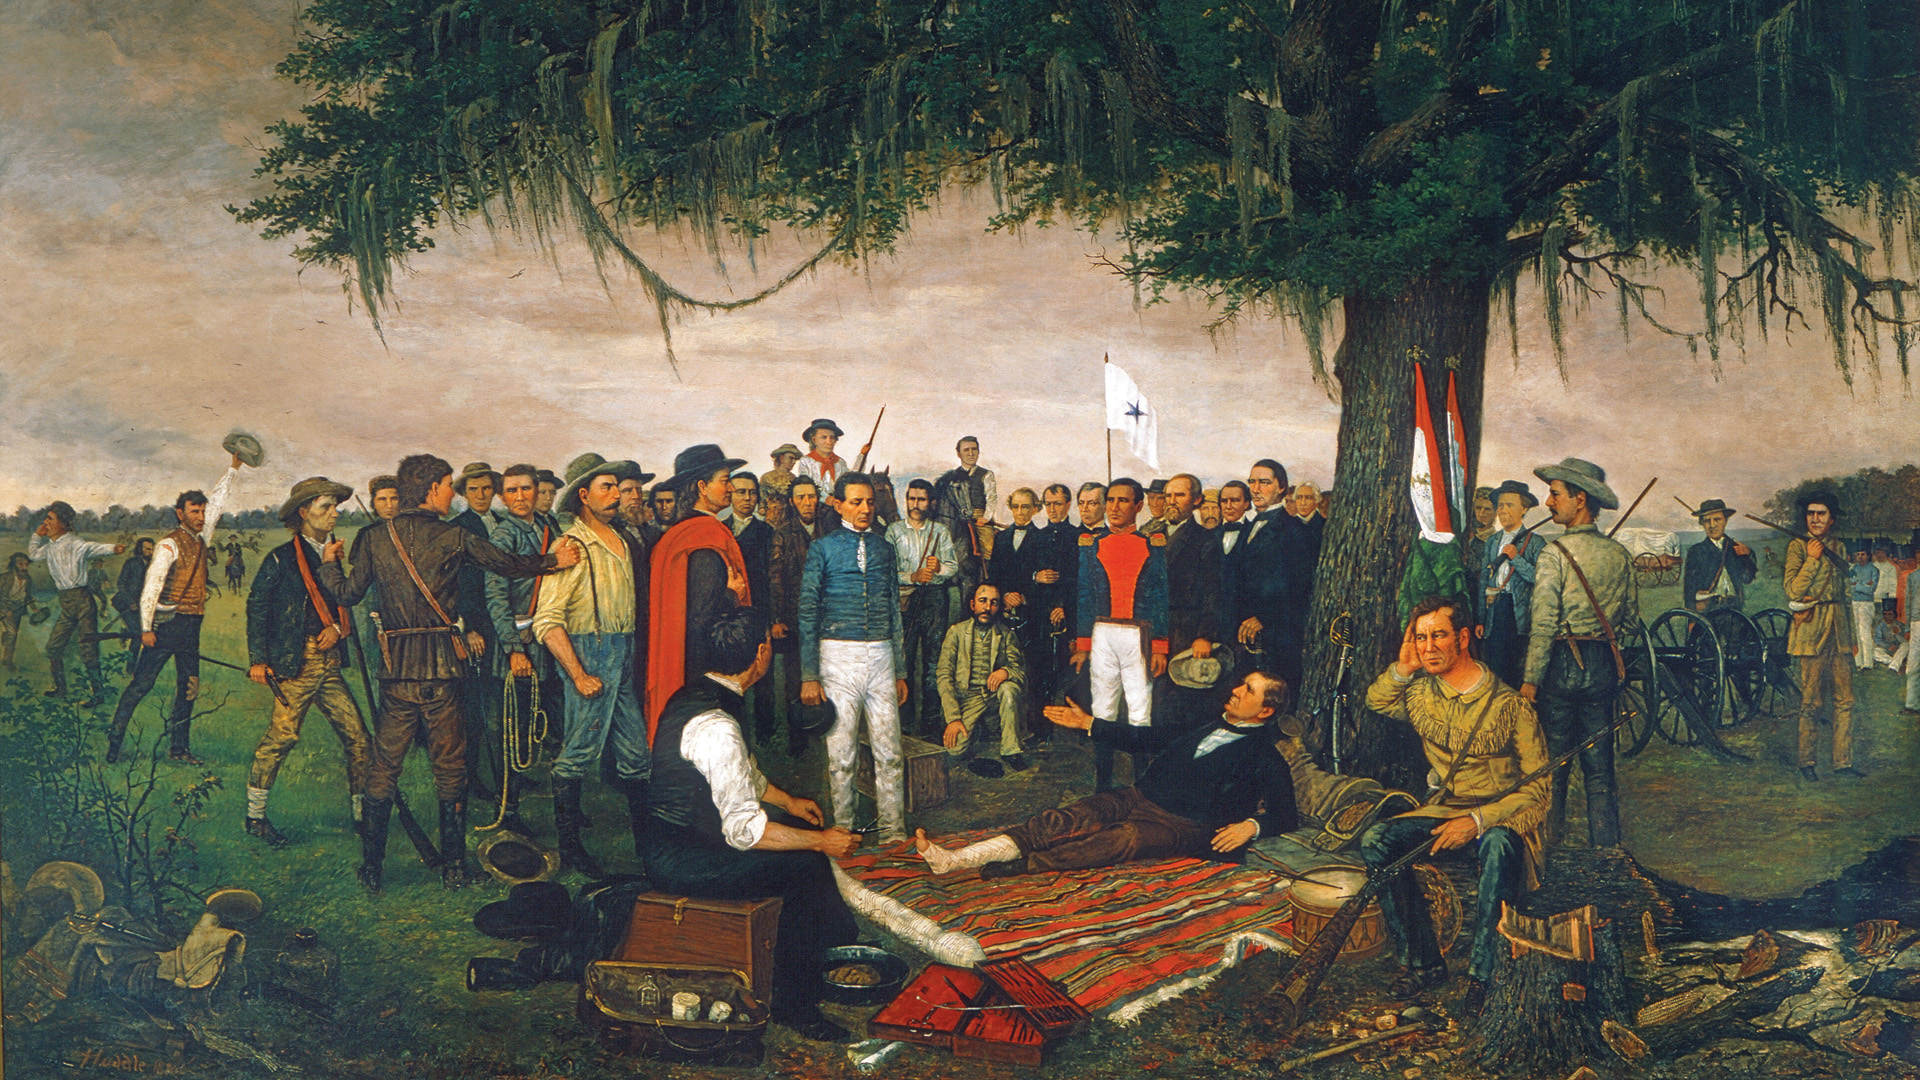 General Santa Anna signed a private agreement after his humiliating defeat at San Jacinto through which he agreed to use his influence to try to get the Mexican government to agree to independence for Mexican Texas.